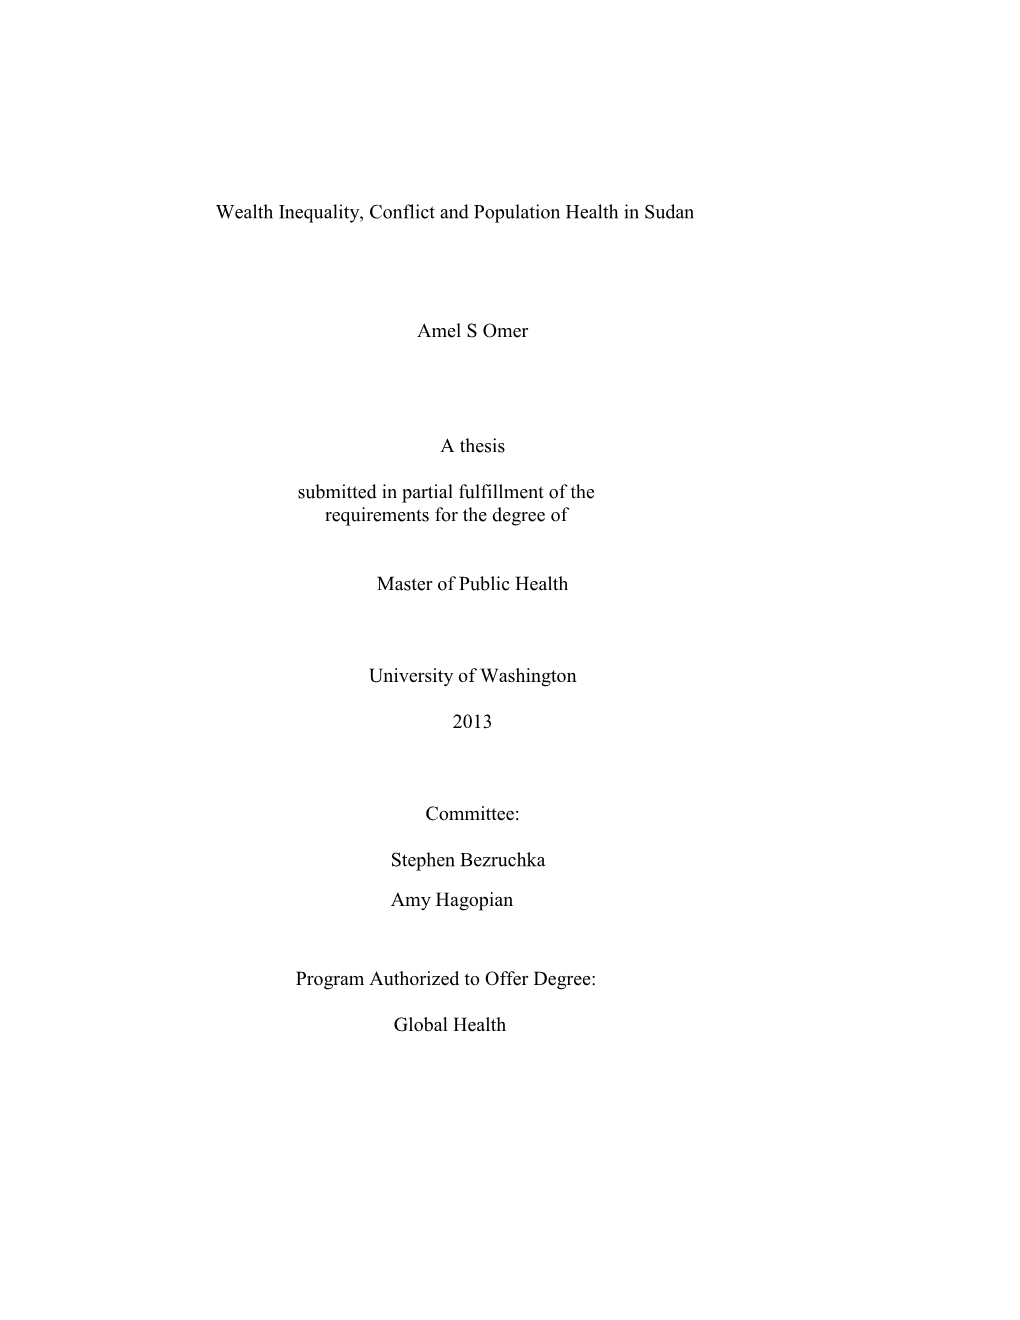 Wealth Inequality, Conflict and Population Health in Sudan Amel S Omer a Thesis Submitted in Partial Fulfillment of the Requirem